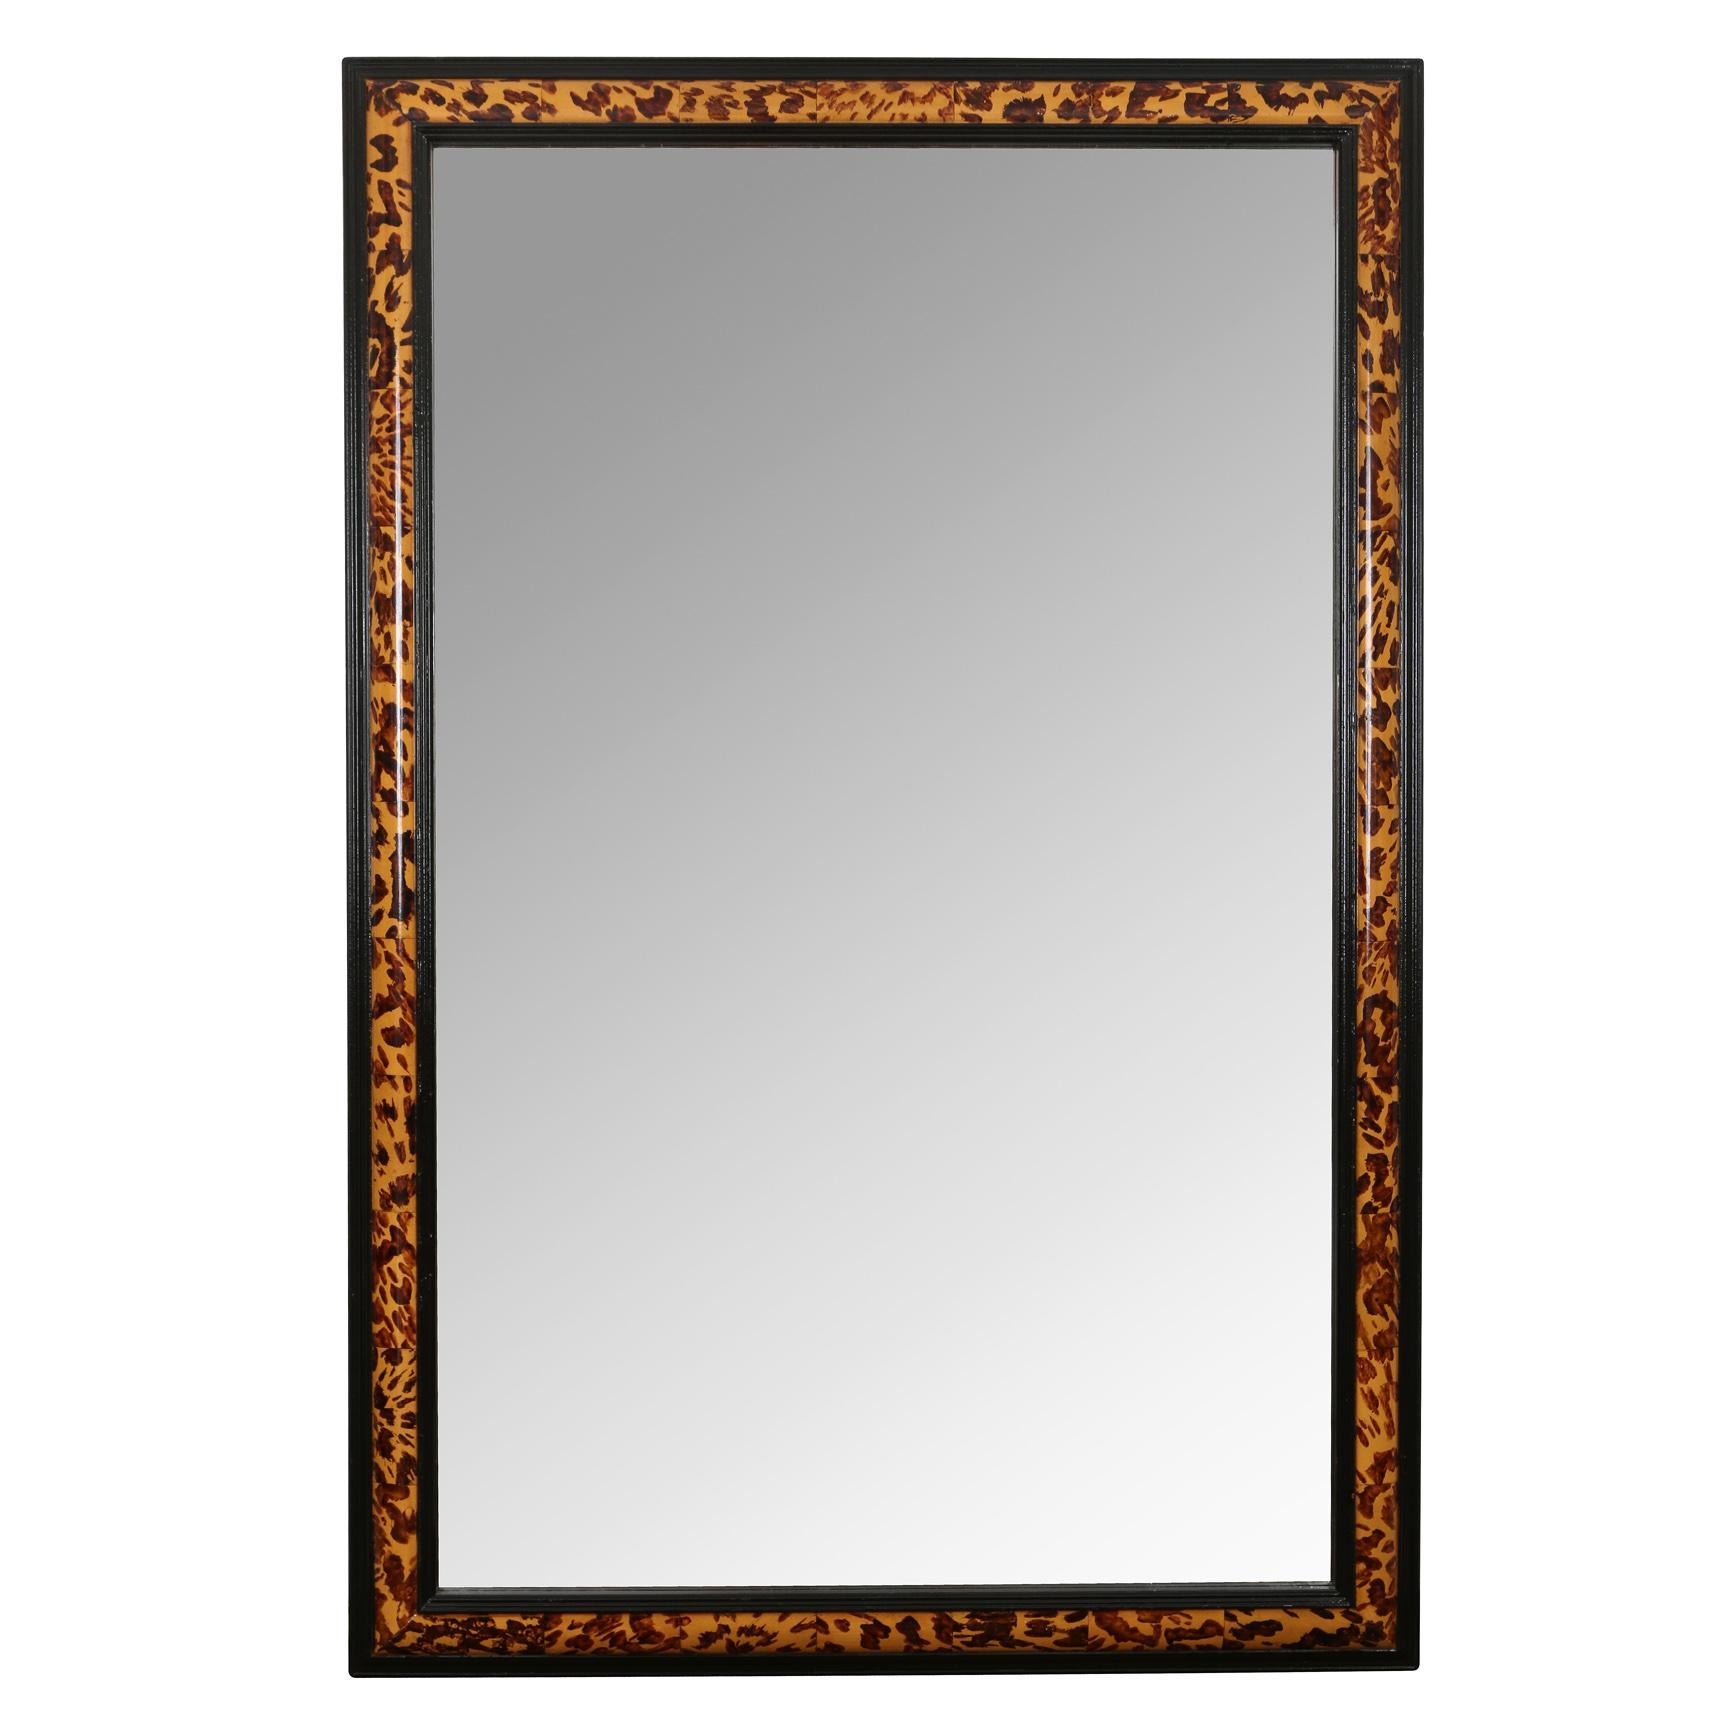 A super chic vintage mirror with faux painted tortoise shell frame.